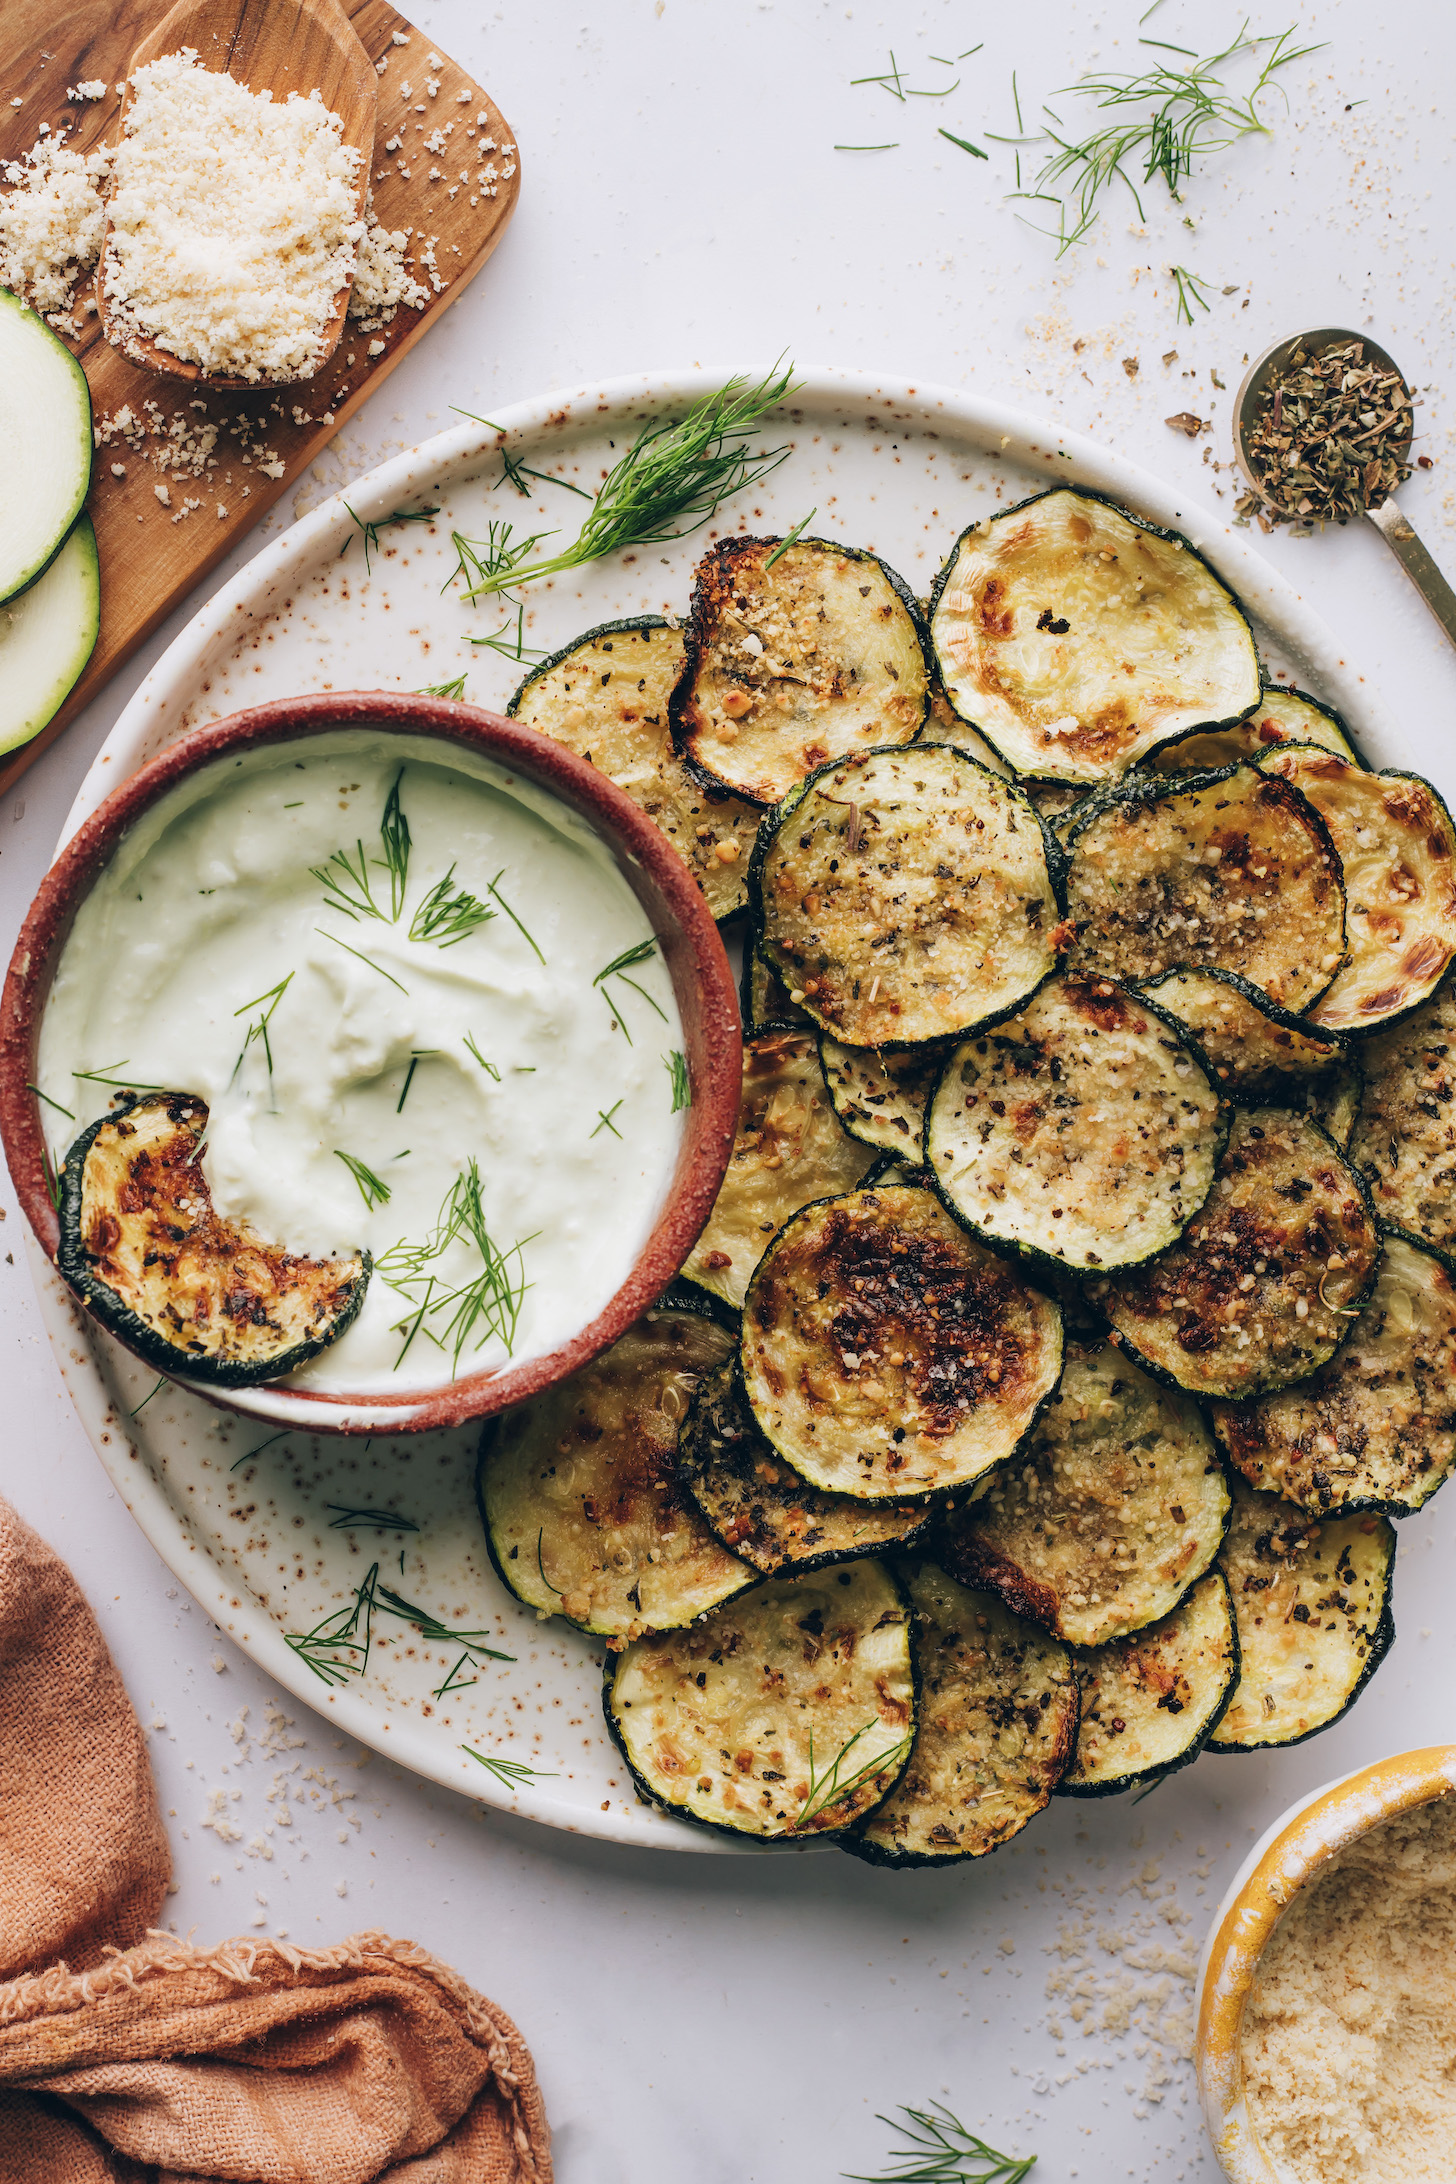 Plate of caramelized baked zucchini slices next to a bowl of vegan ranch dressing